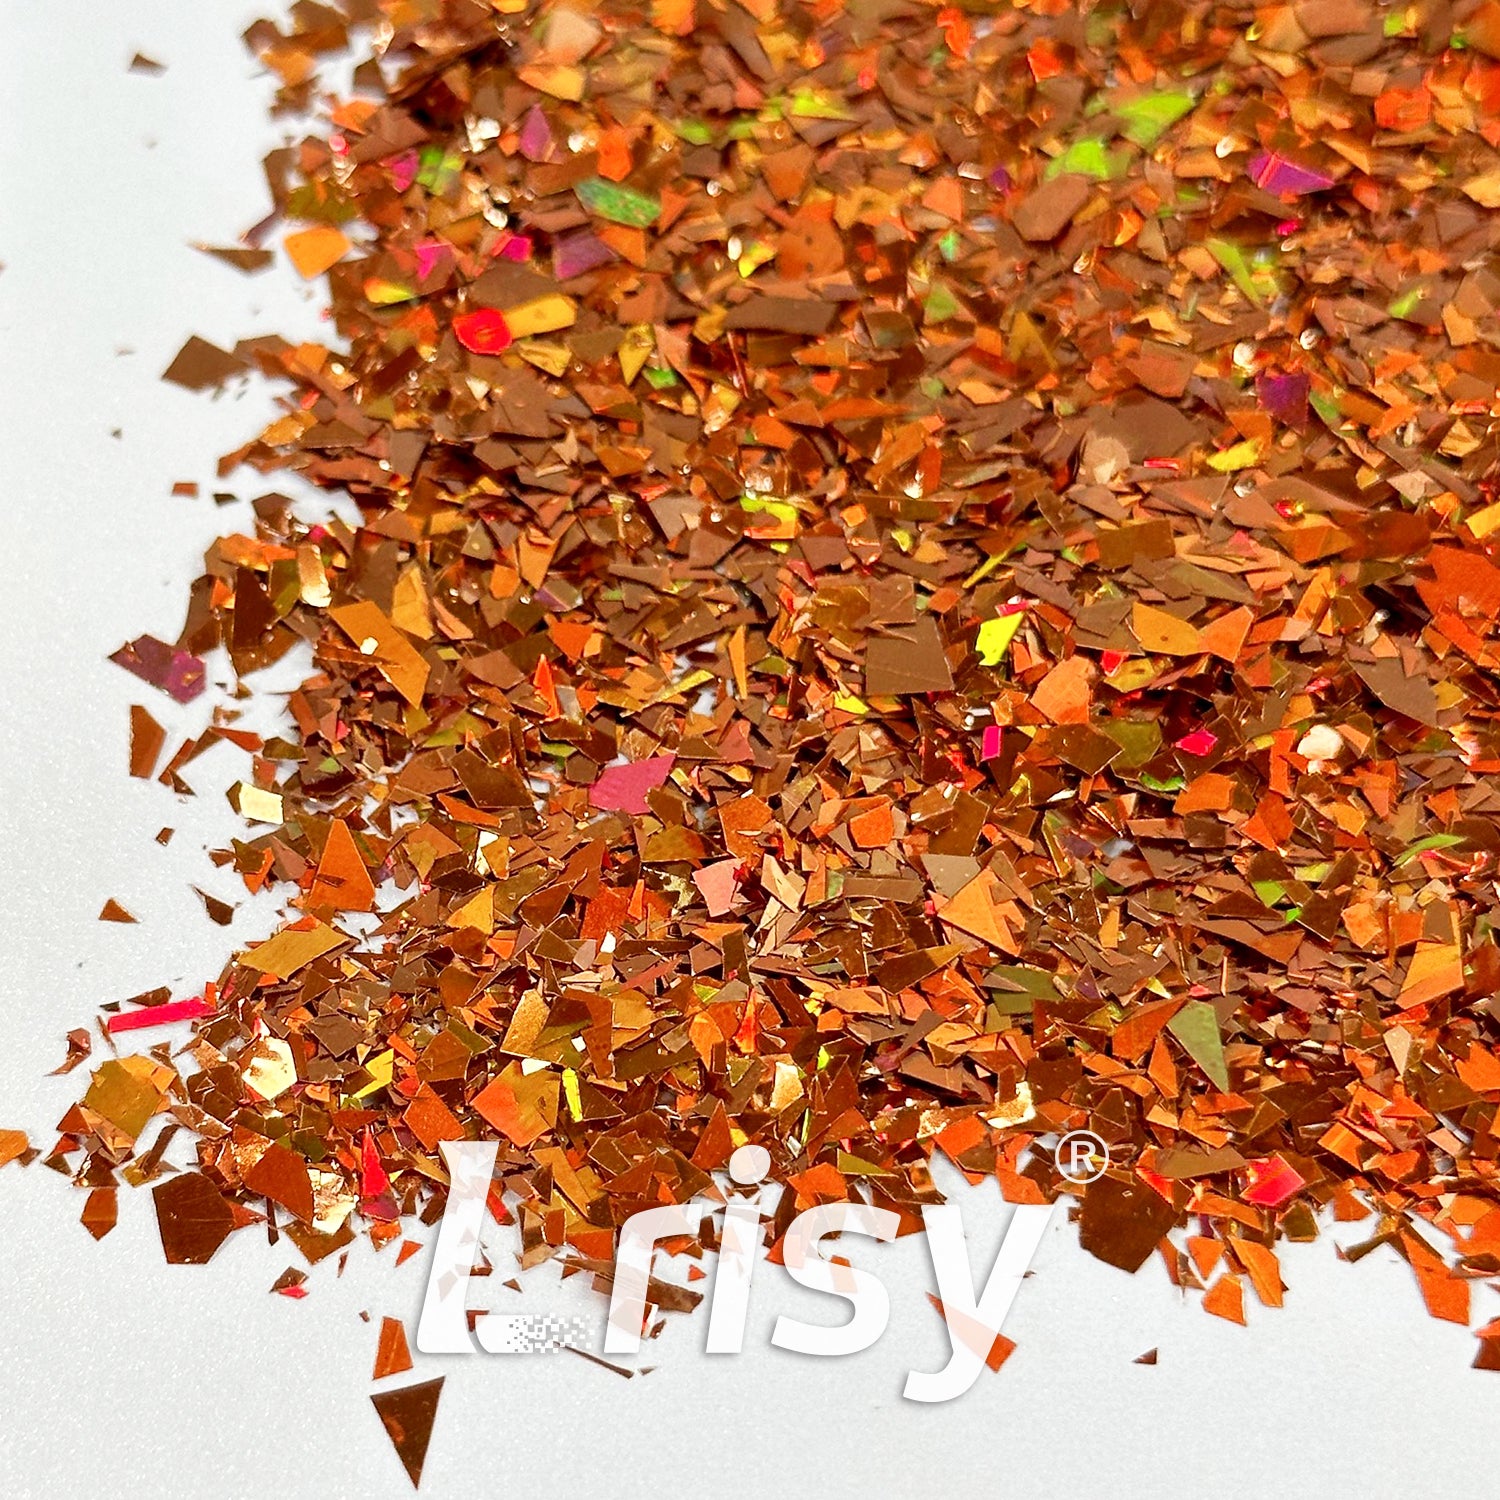 Holographic Red Bronze Cellophane Glitter Flakes Holo Shards LB0401 4x4